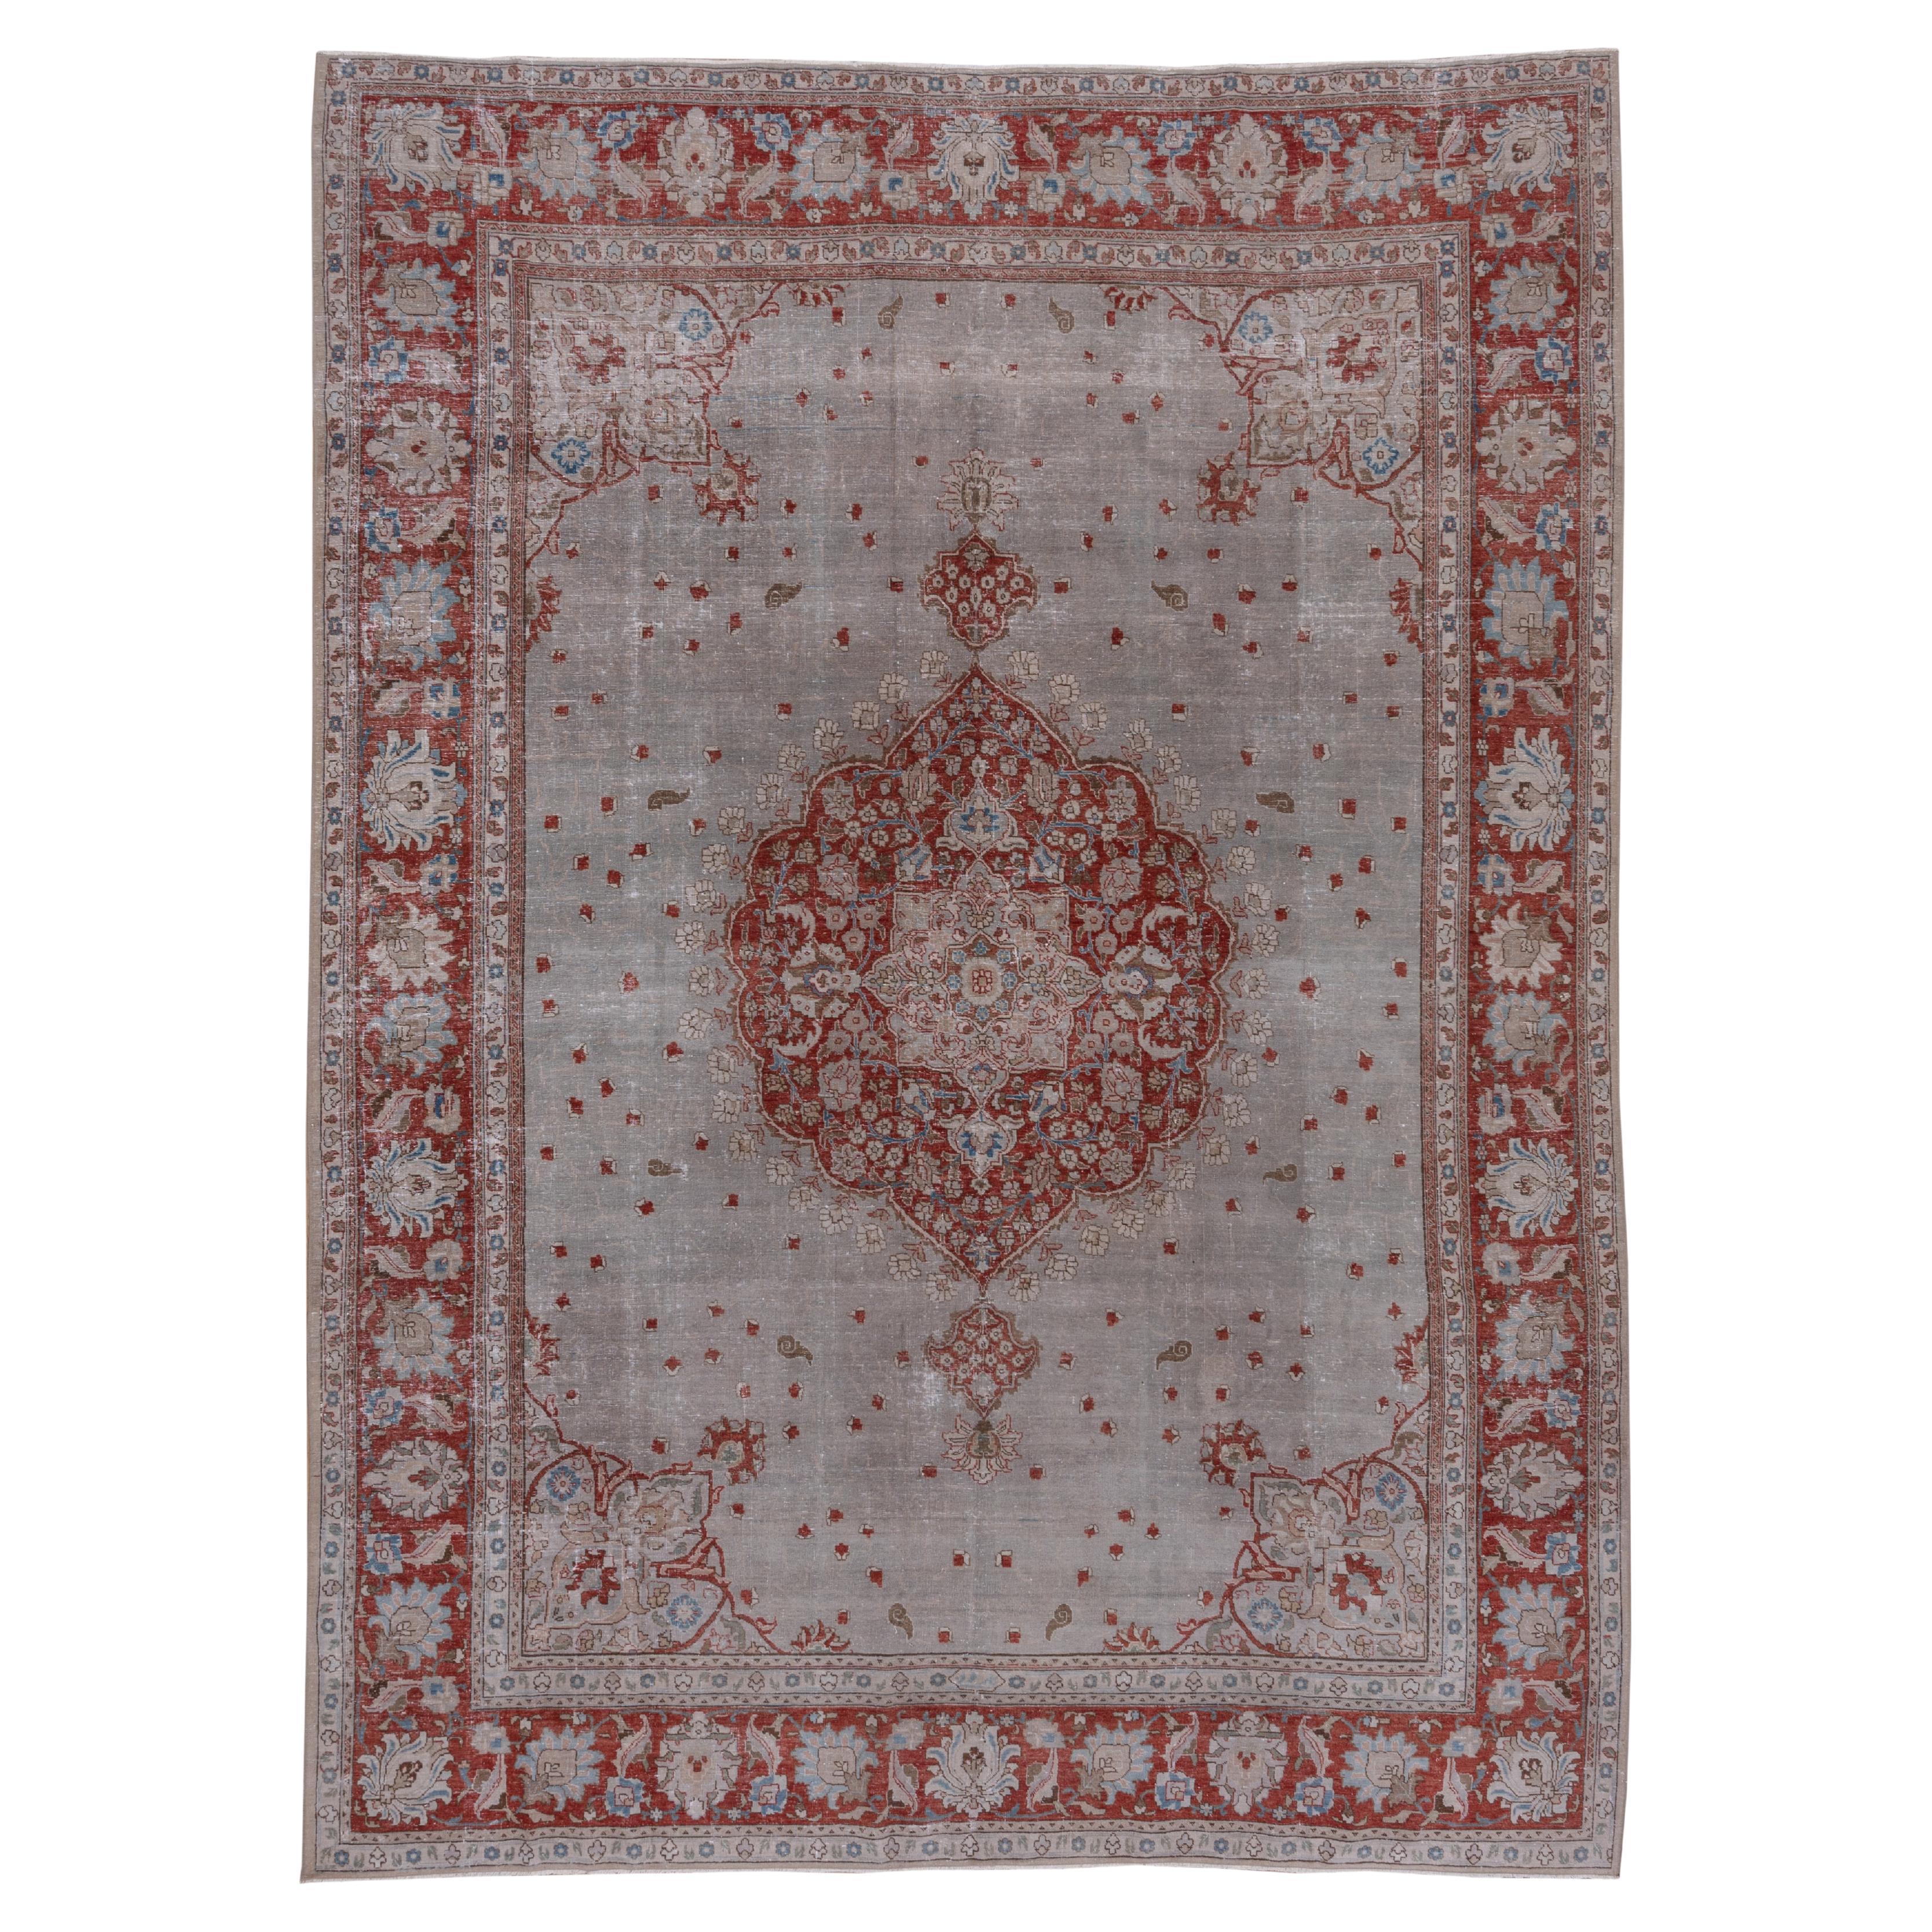 Eliko Rug by David Ariel Persian Tabriz Rug, Grey Subfield and Red Borders For Sale